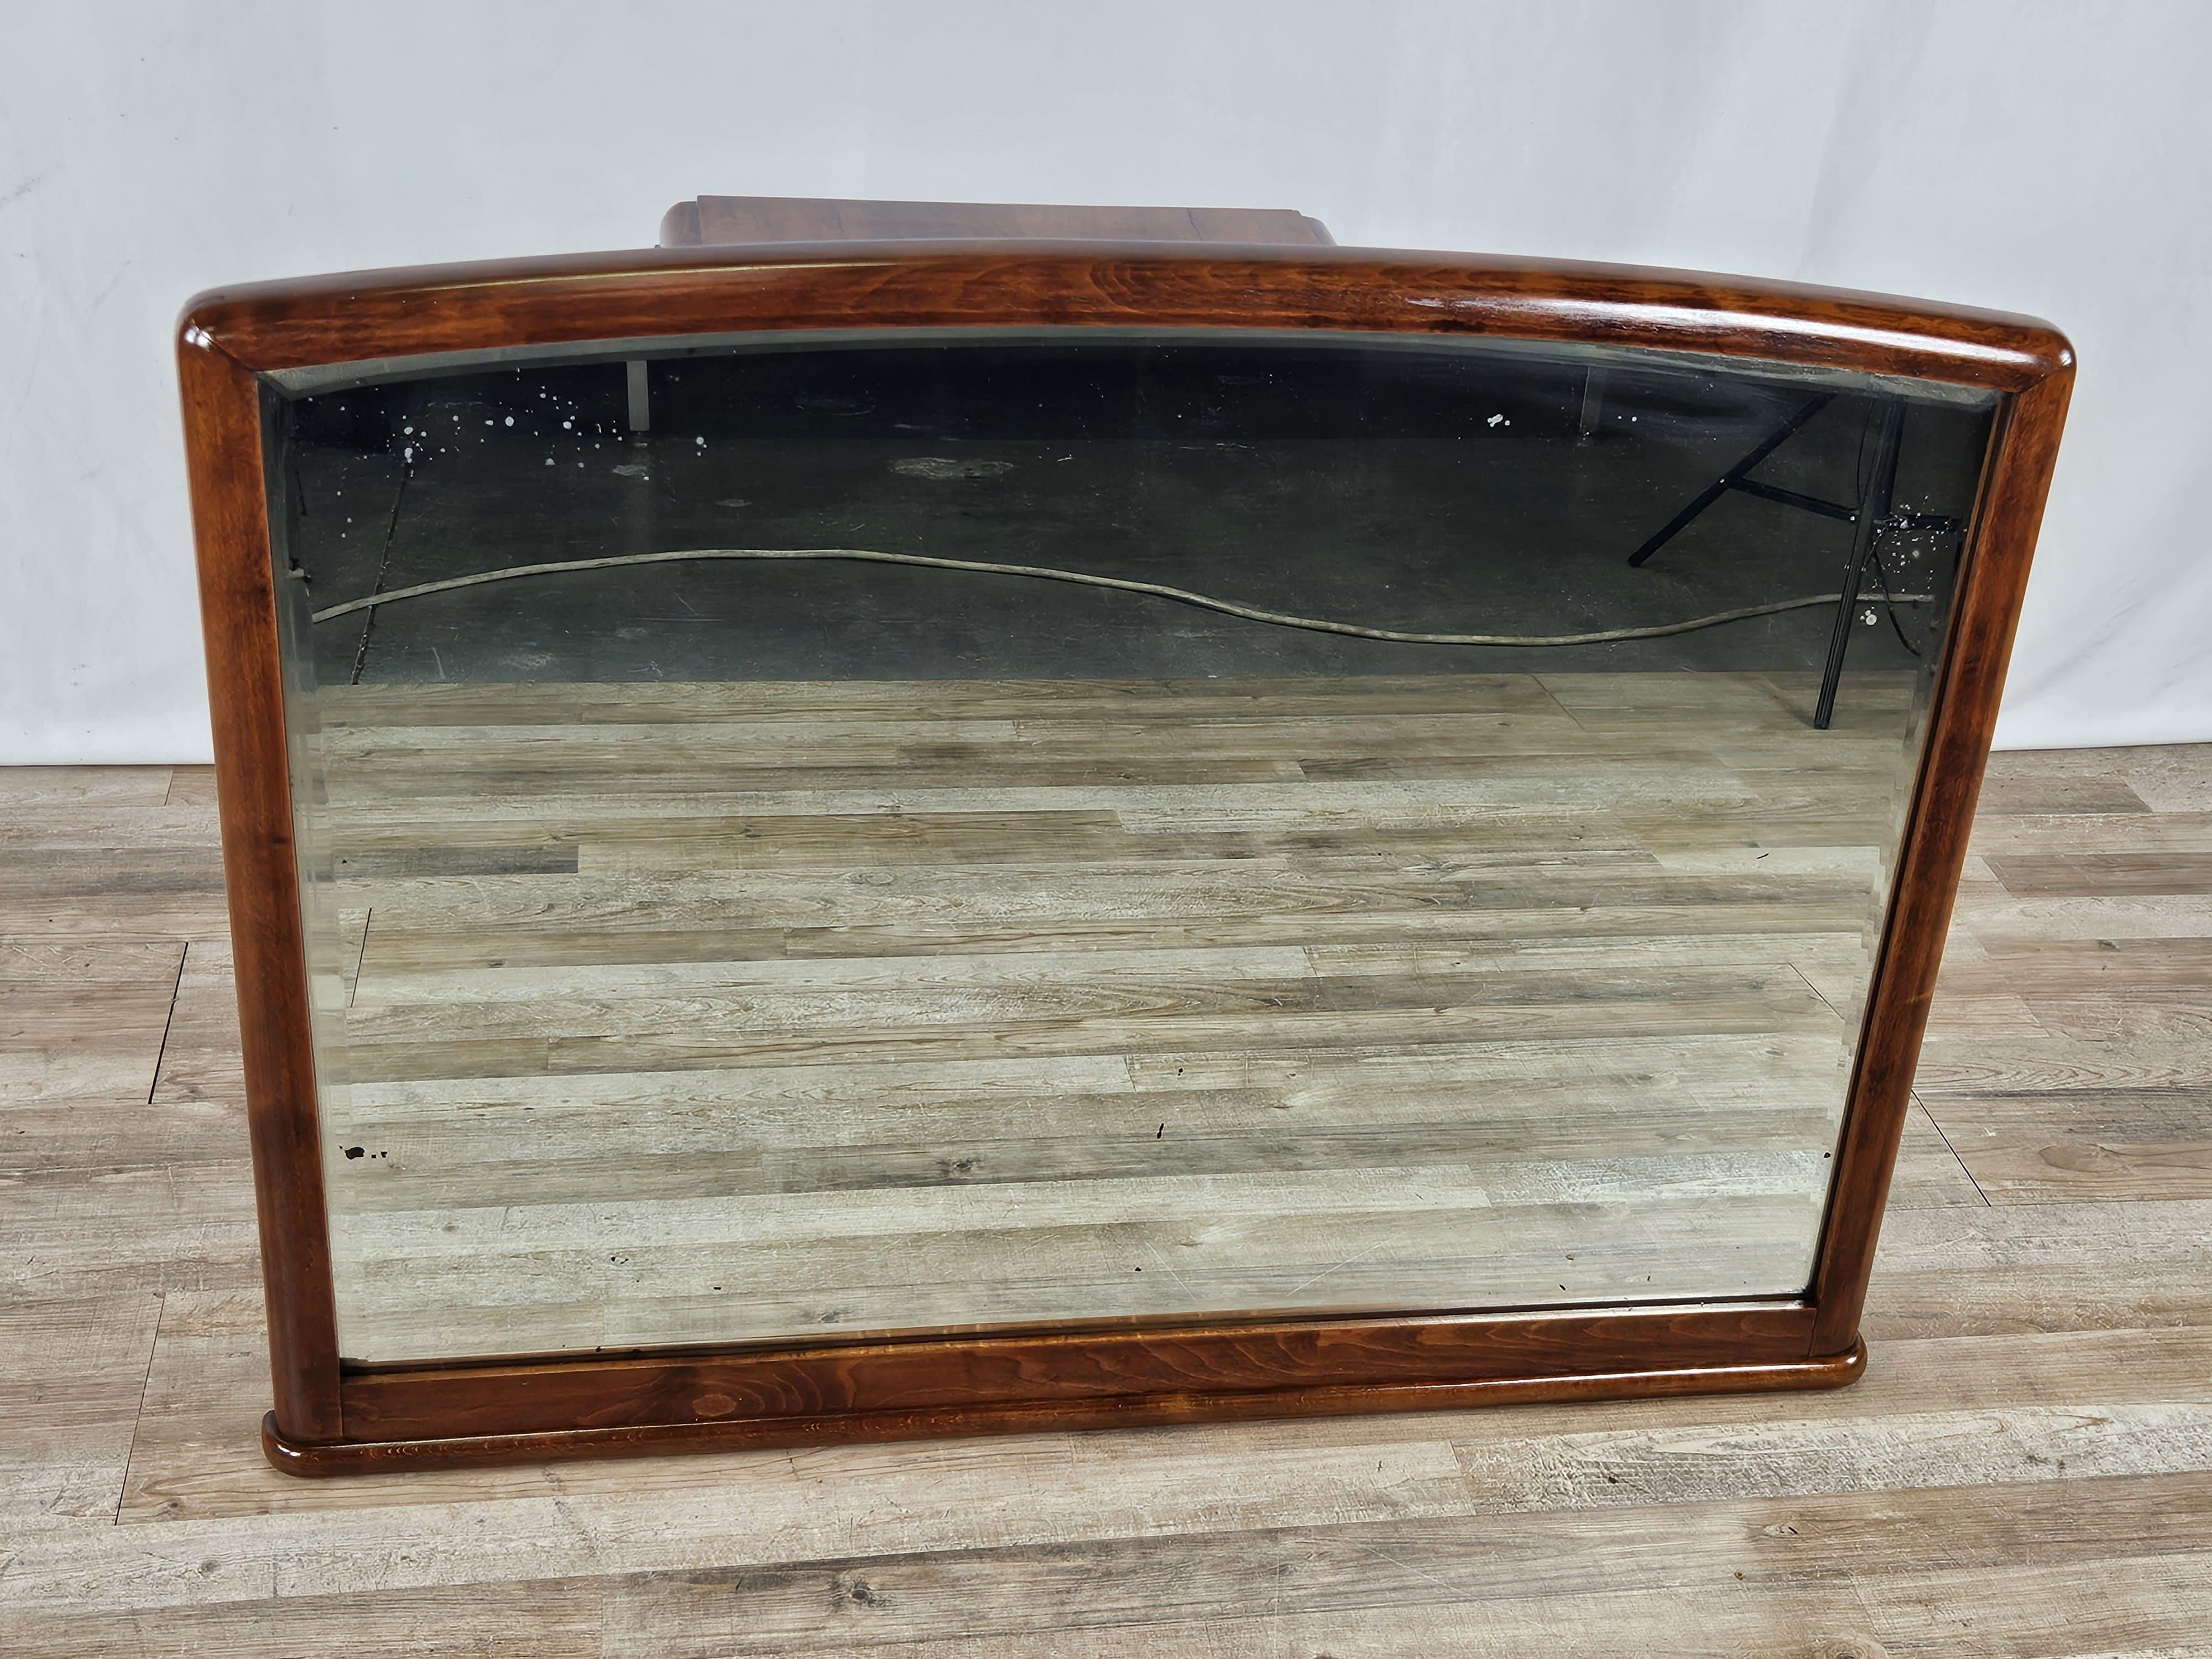 1940s Art Deco briarwood mirror with beveled glass original to the period.

It comes from a dresser.

The frame has been oil and shellac polished, ready to be placed on a credenza top or in an entryway with a console table.